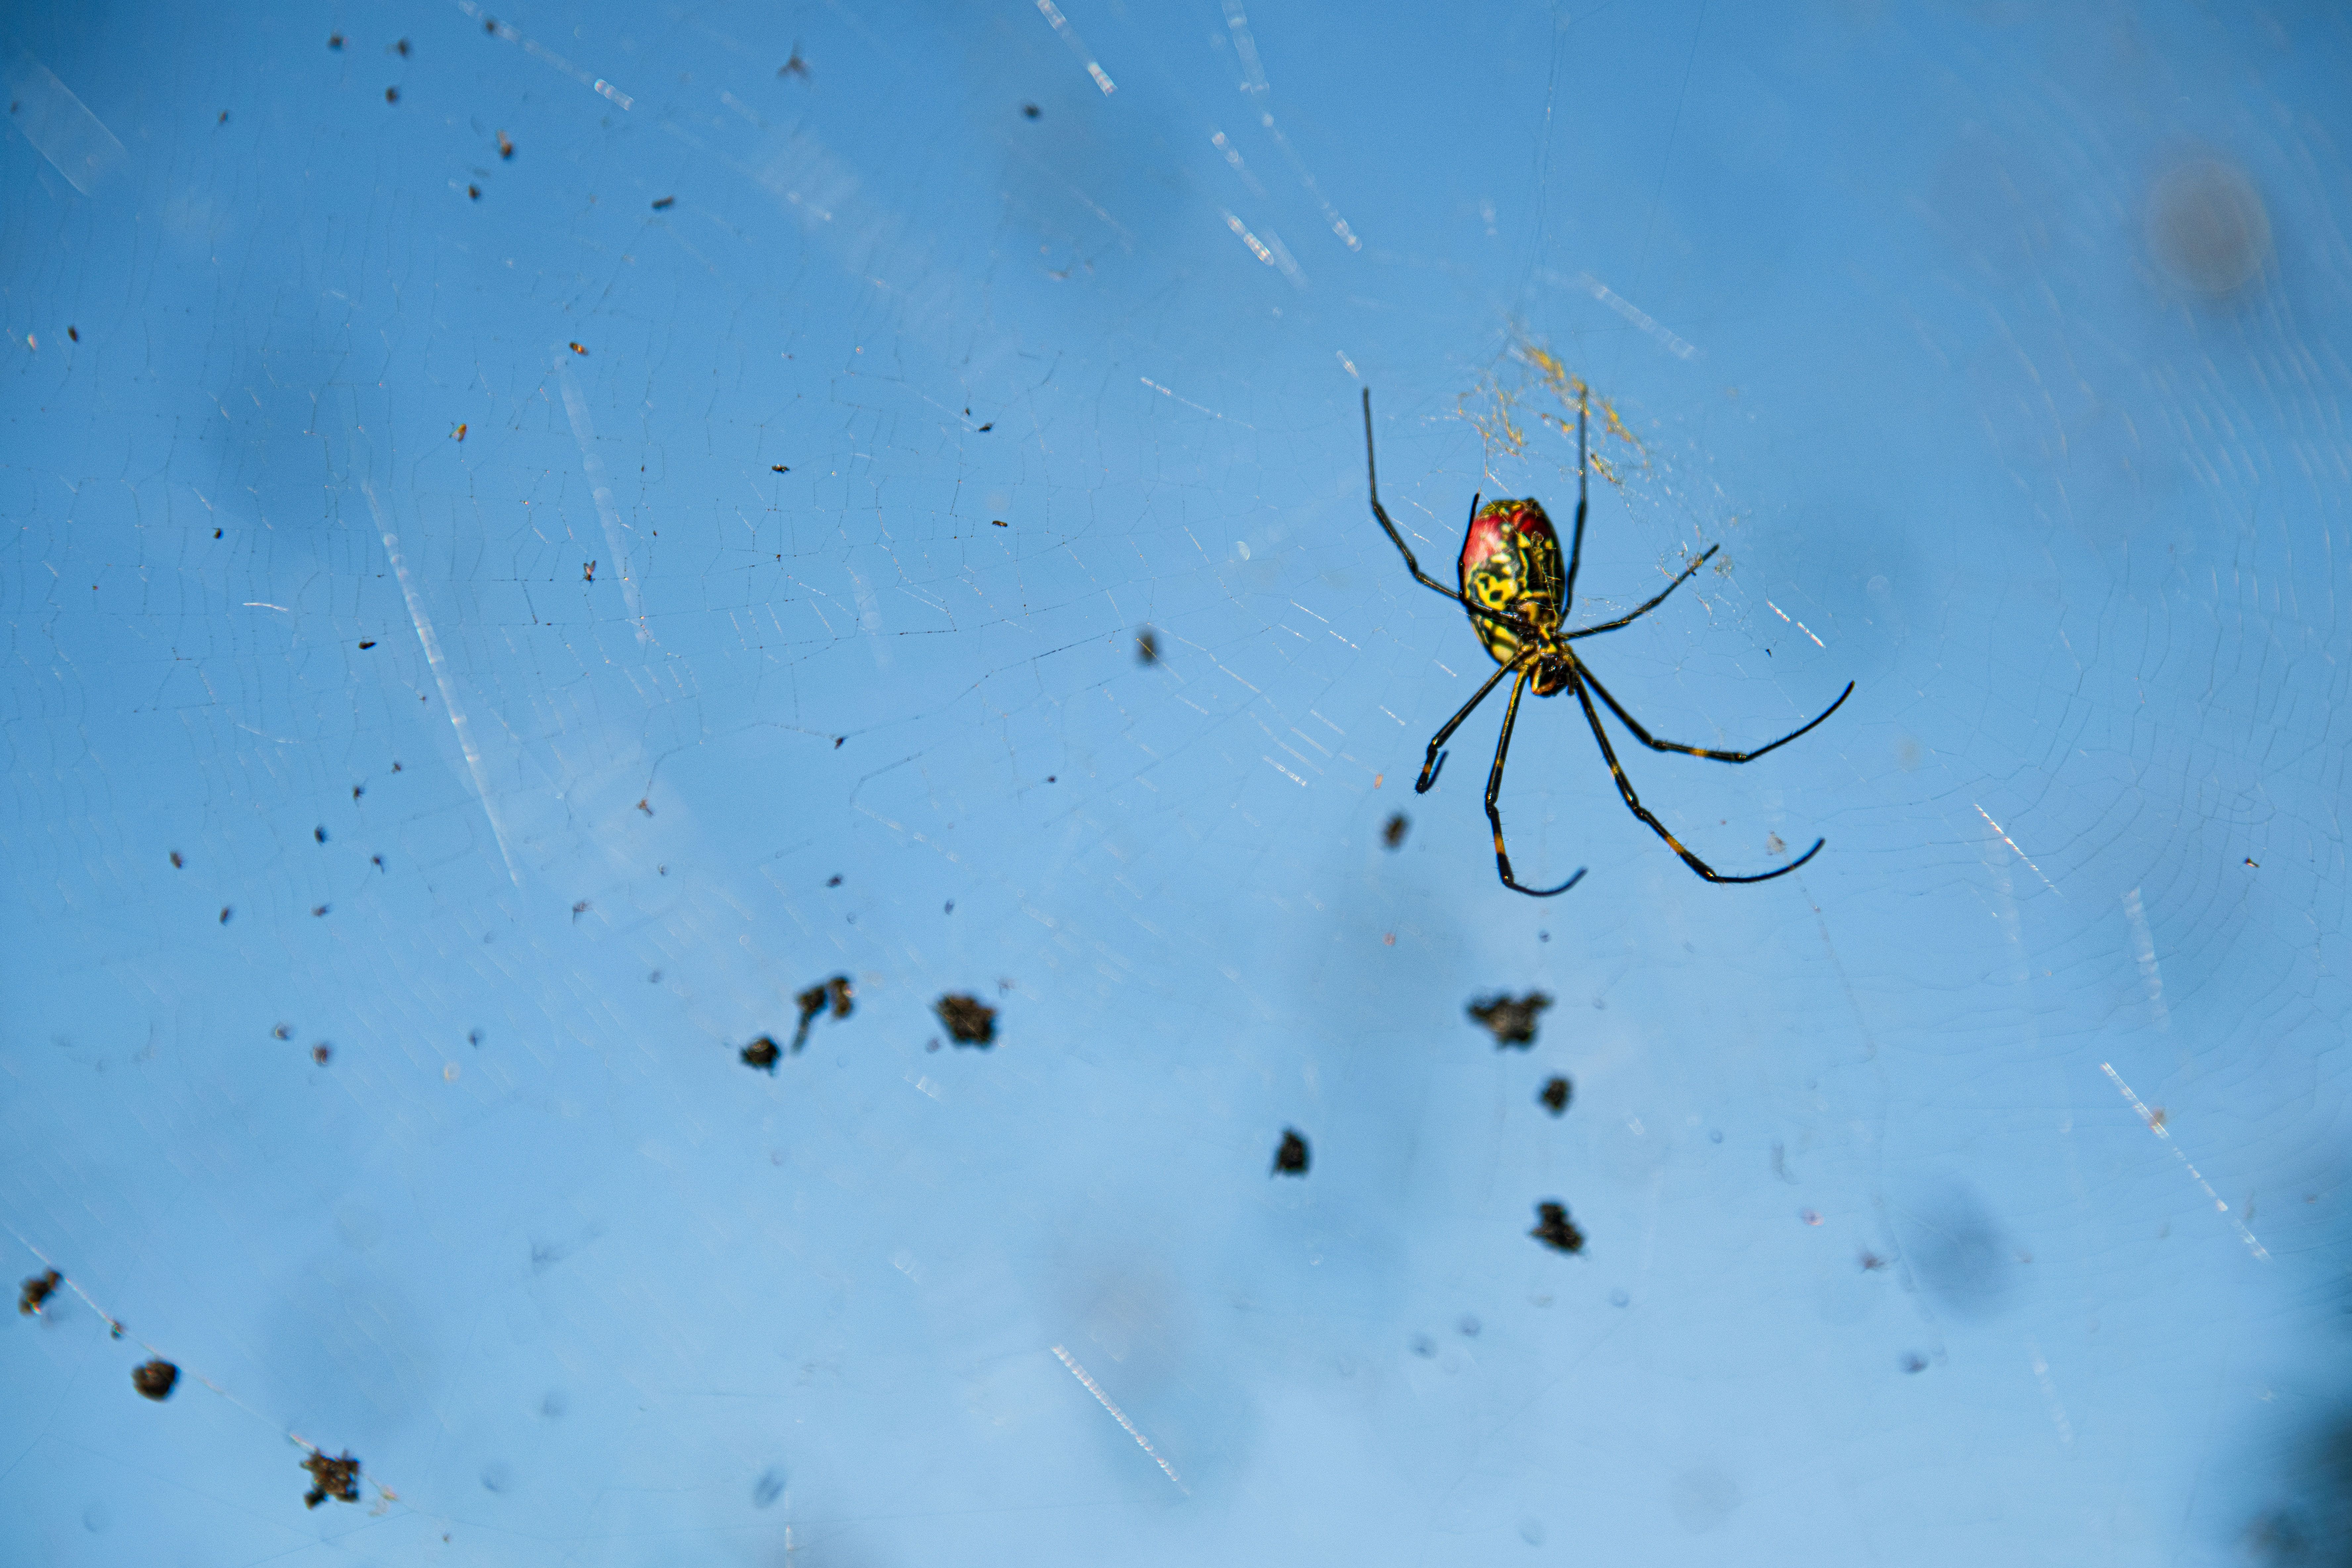 Clemson scientist: Study shows Joro spiders 'here to stay,' spreading fast